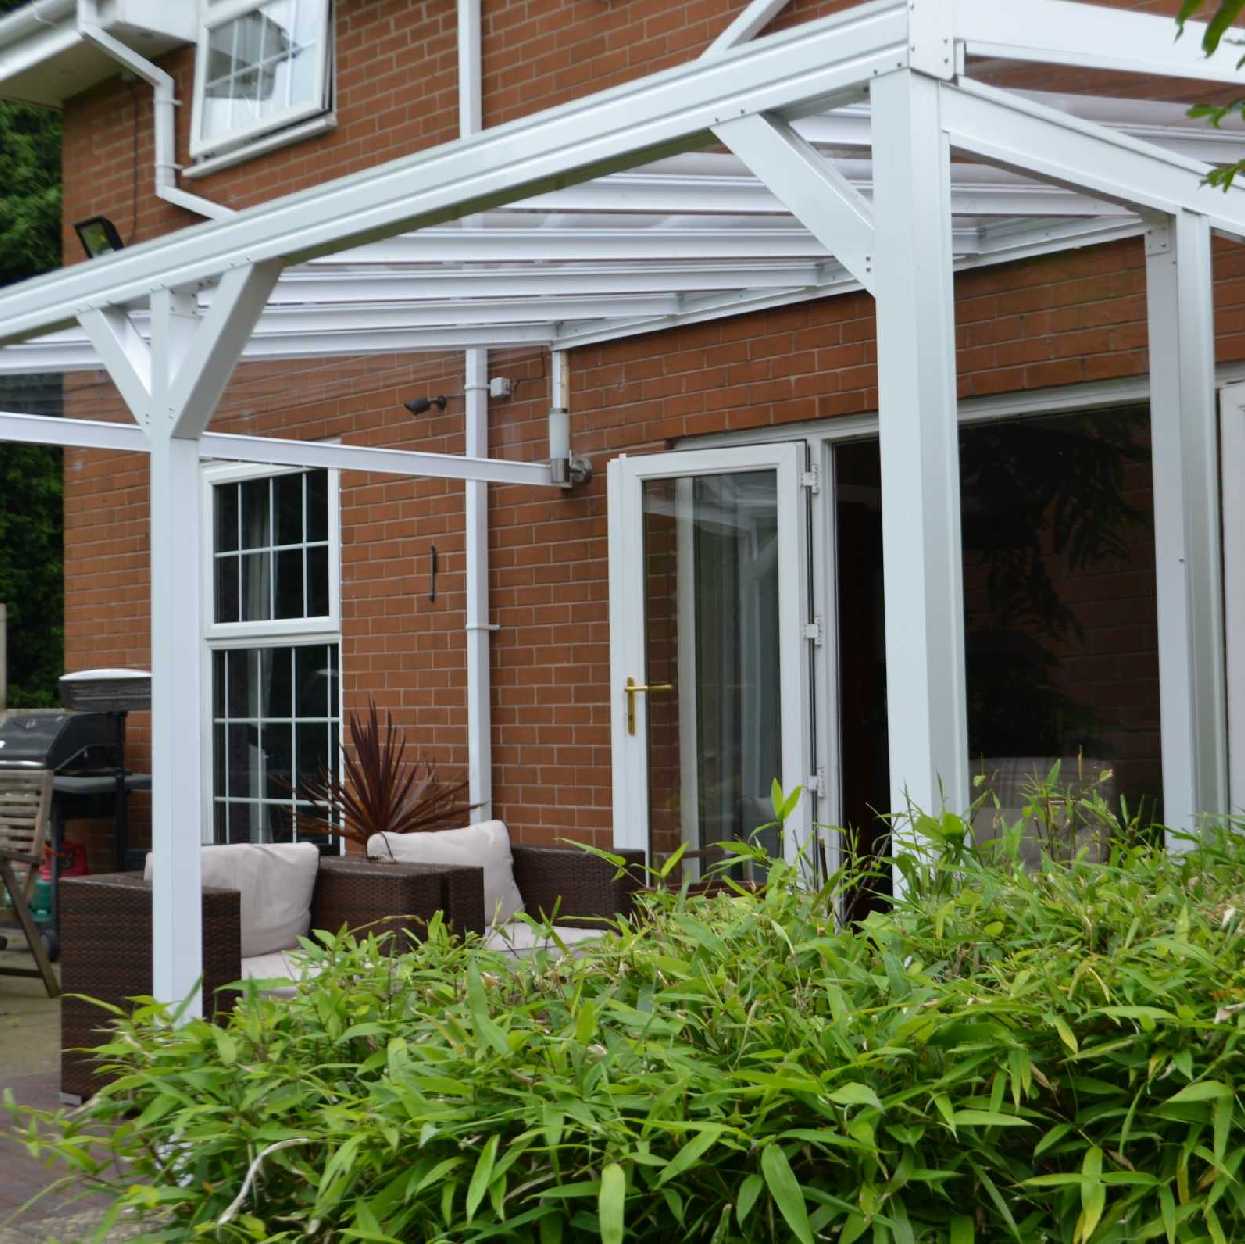 Omega Smart Lean-To Canopy, White with 6mm Glass Clear Plate Polycarbonate Glazing - 4.2m (W) x 1.5m (P), (3) Supporting Posts from Omega Build